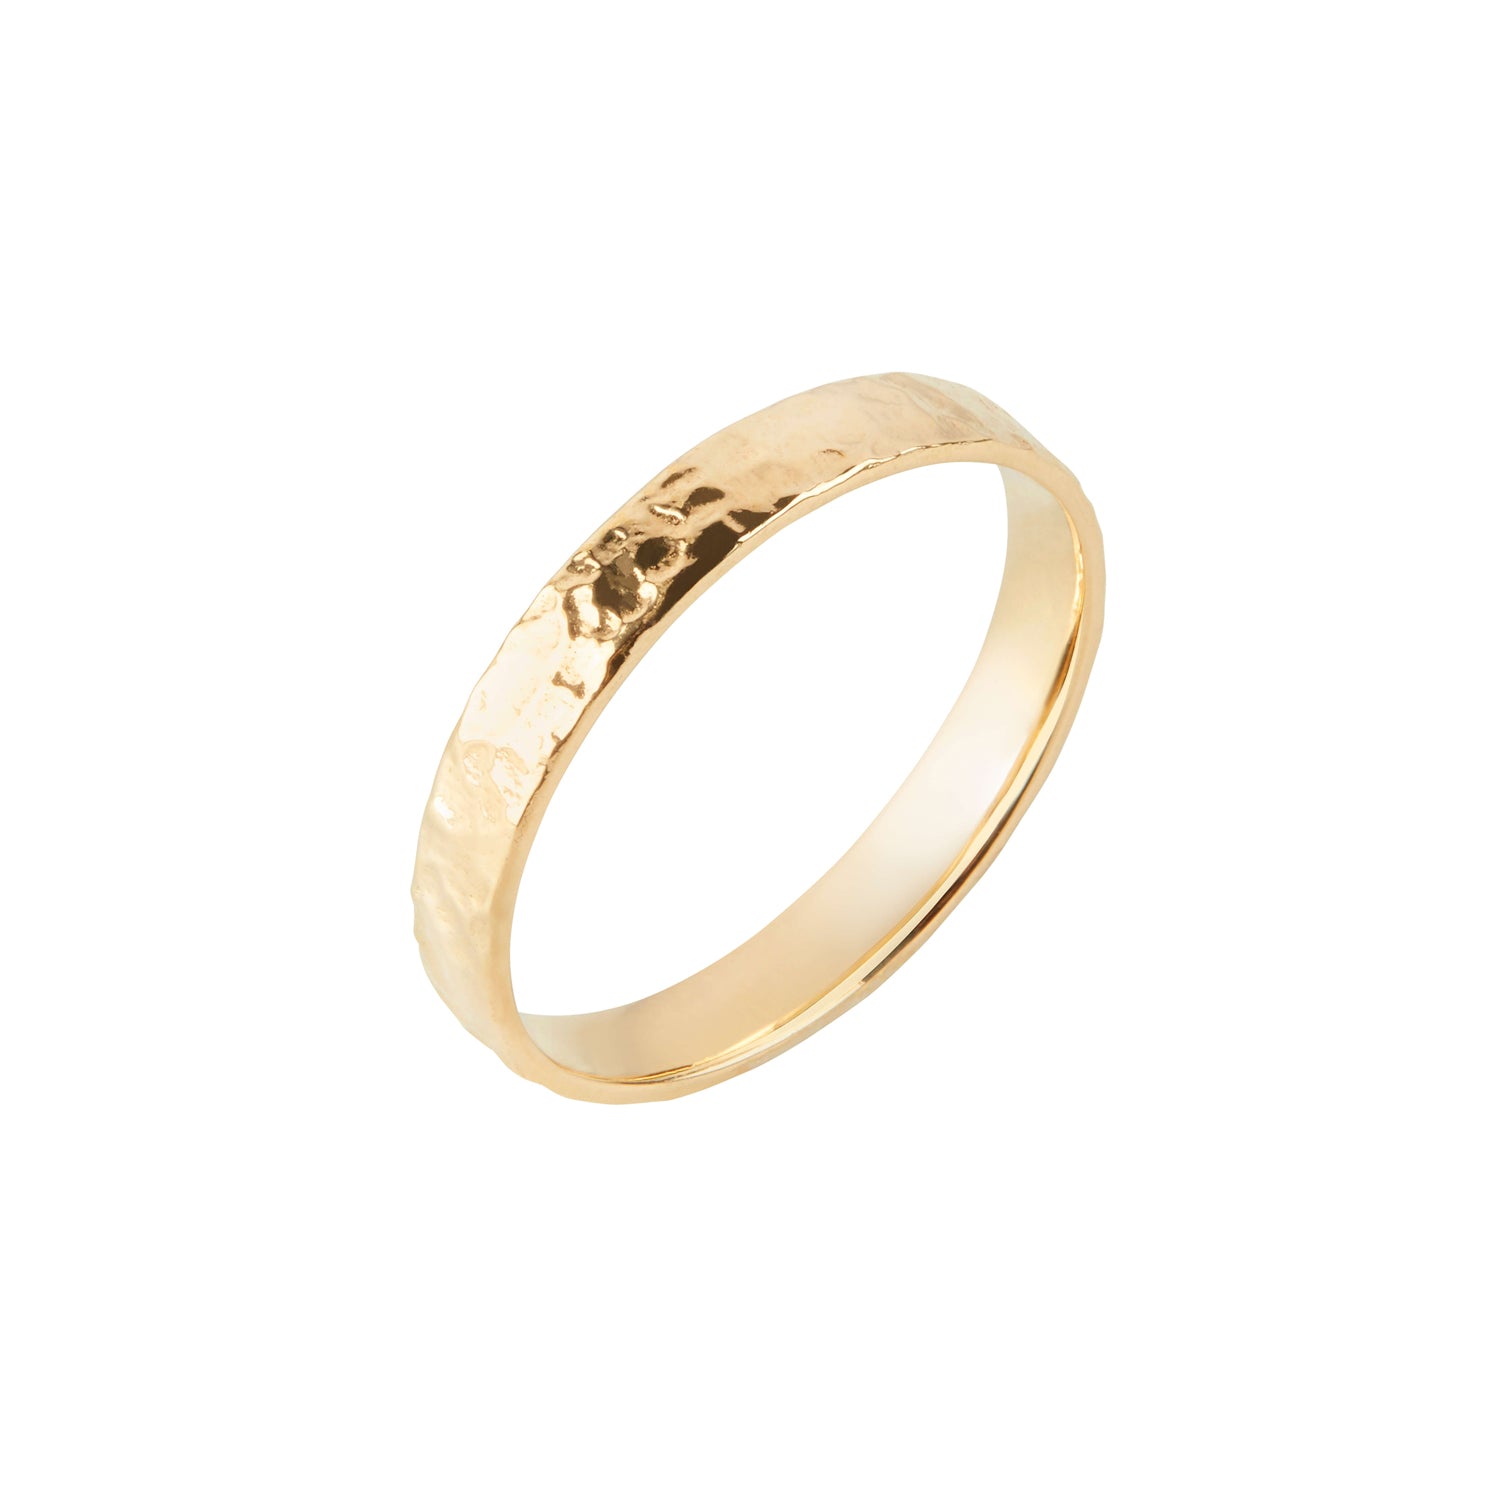 Hammered Band Ring 9k Gold – Zohreh V. Jewellery